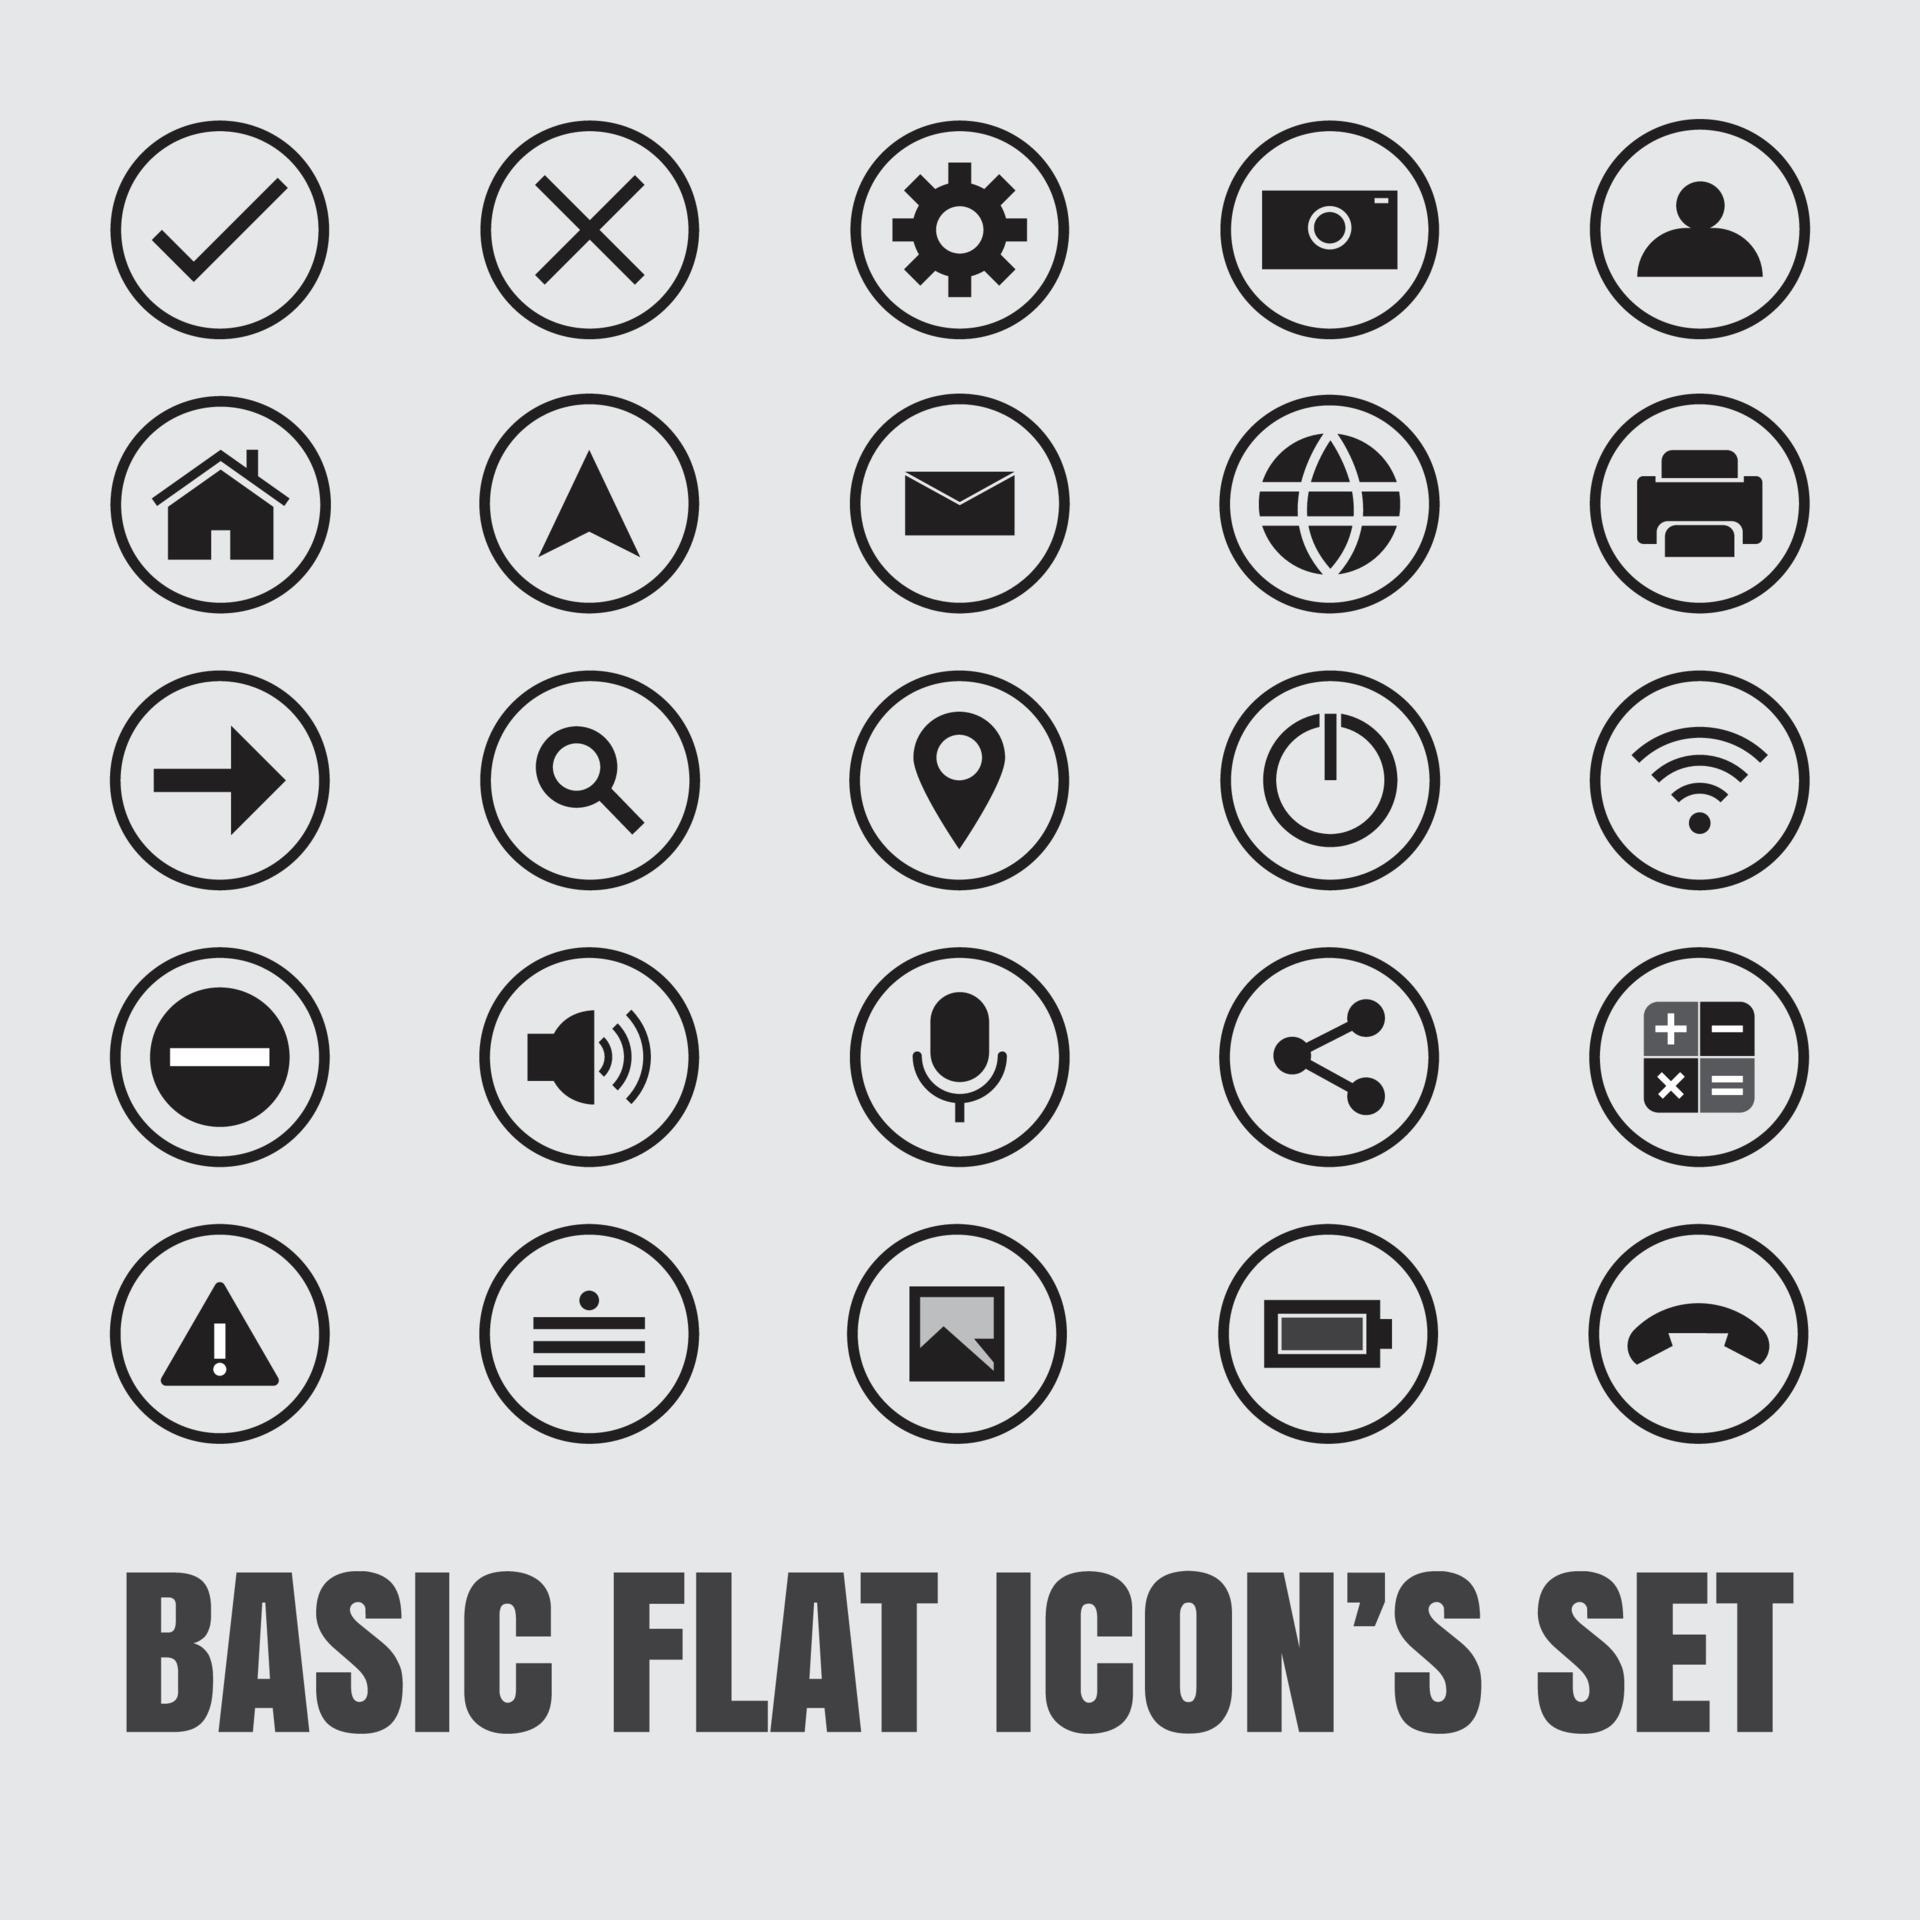 https://static.vecteezy.com/system/resources/previews/019/153/345/original/basic-flat-icons-set-simplicity-meets-versatility-in-our-basic-flat-icon-set-ideal-for-web-app-or-print-designs-these-flat-icons-offer-a-modern-and-clean-aesthetic-to-enhance-your-projects-vector.jpg